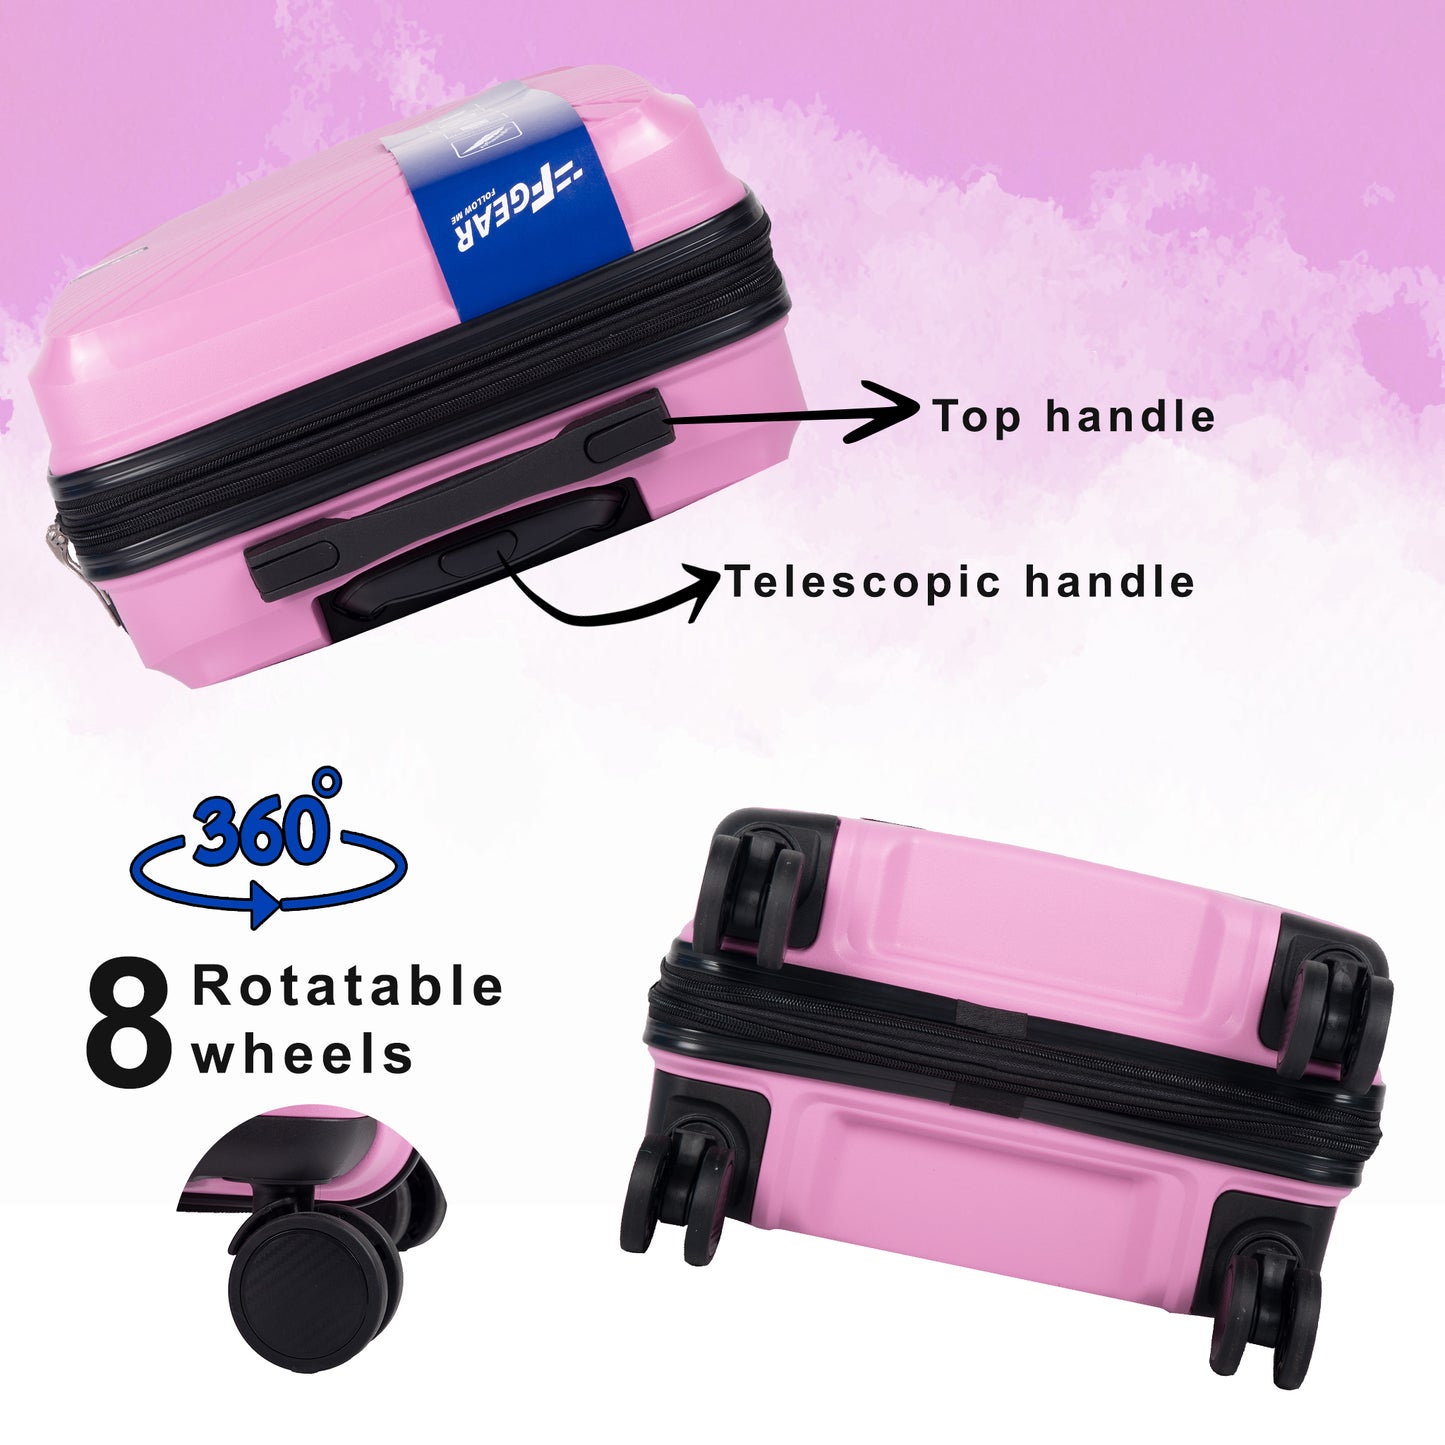 STV PP03 Pink Expandable Cabin Suitcase Set of 3